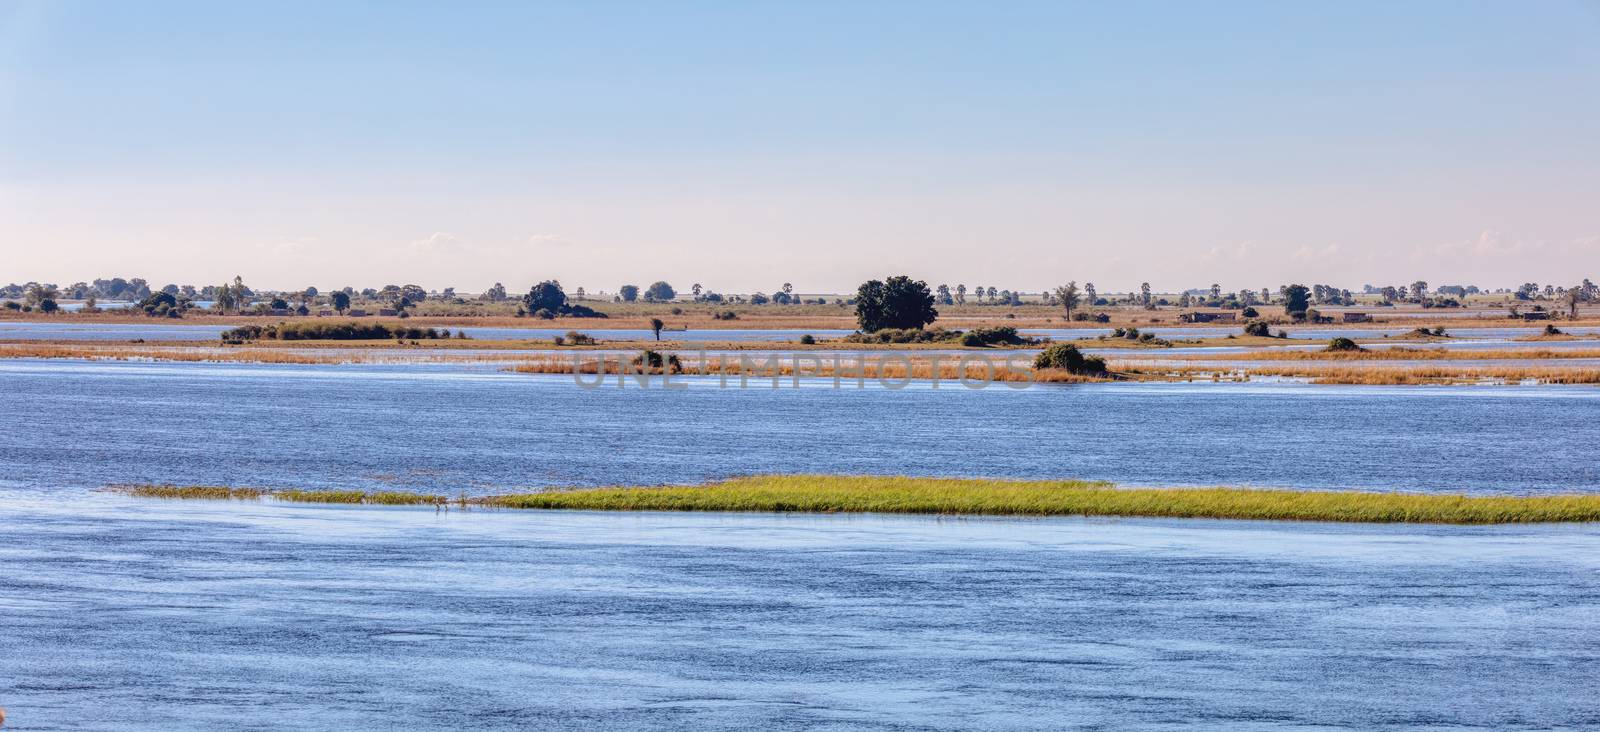 picturesque landscape of Chobe river in Botswana. Africa wilderness